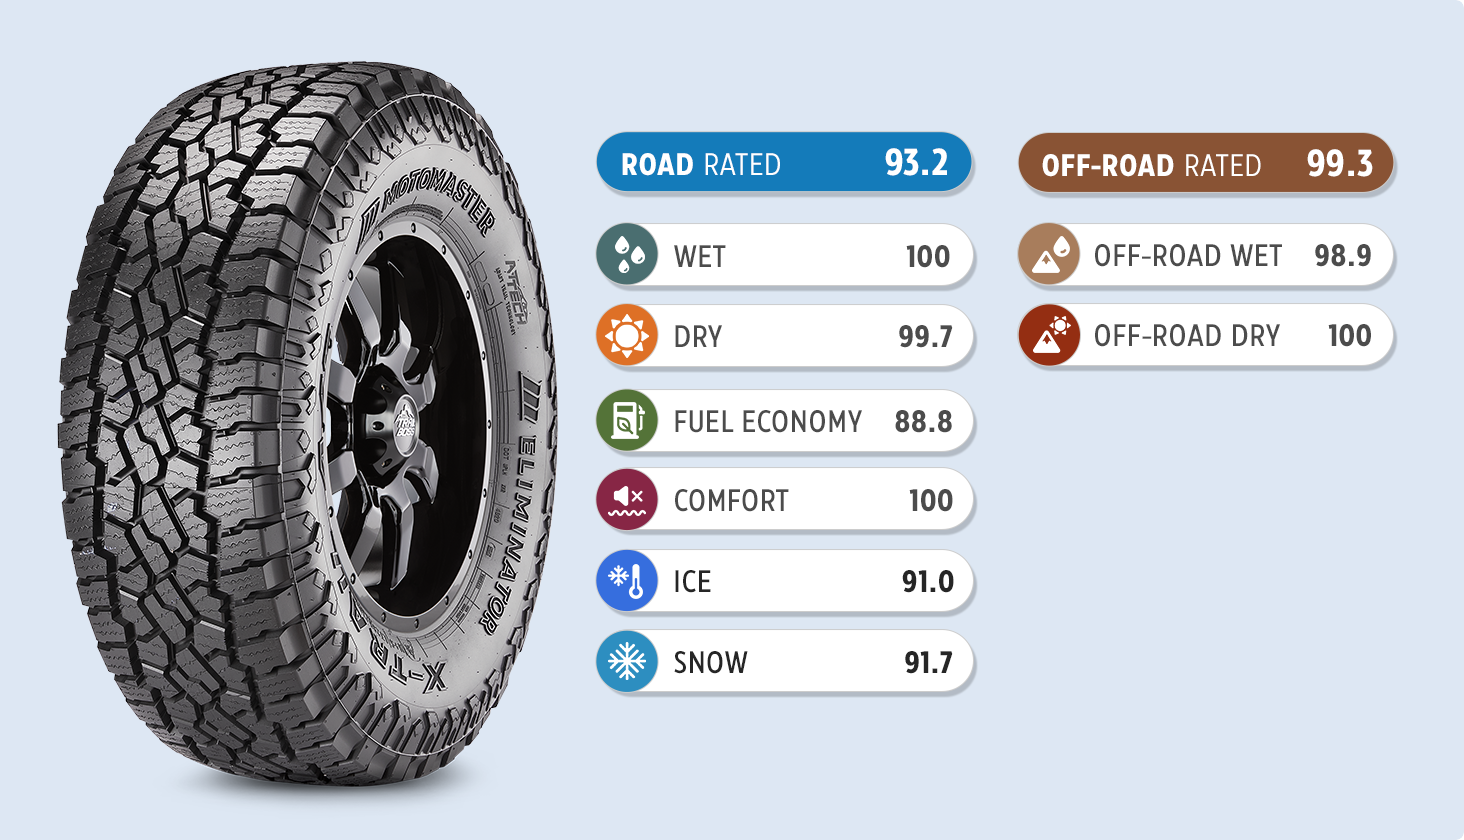 A MotoMaster Eliminator X-Trail A/T All-Terrain Tire next to its Road Rated scorecard.